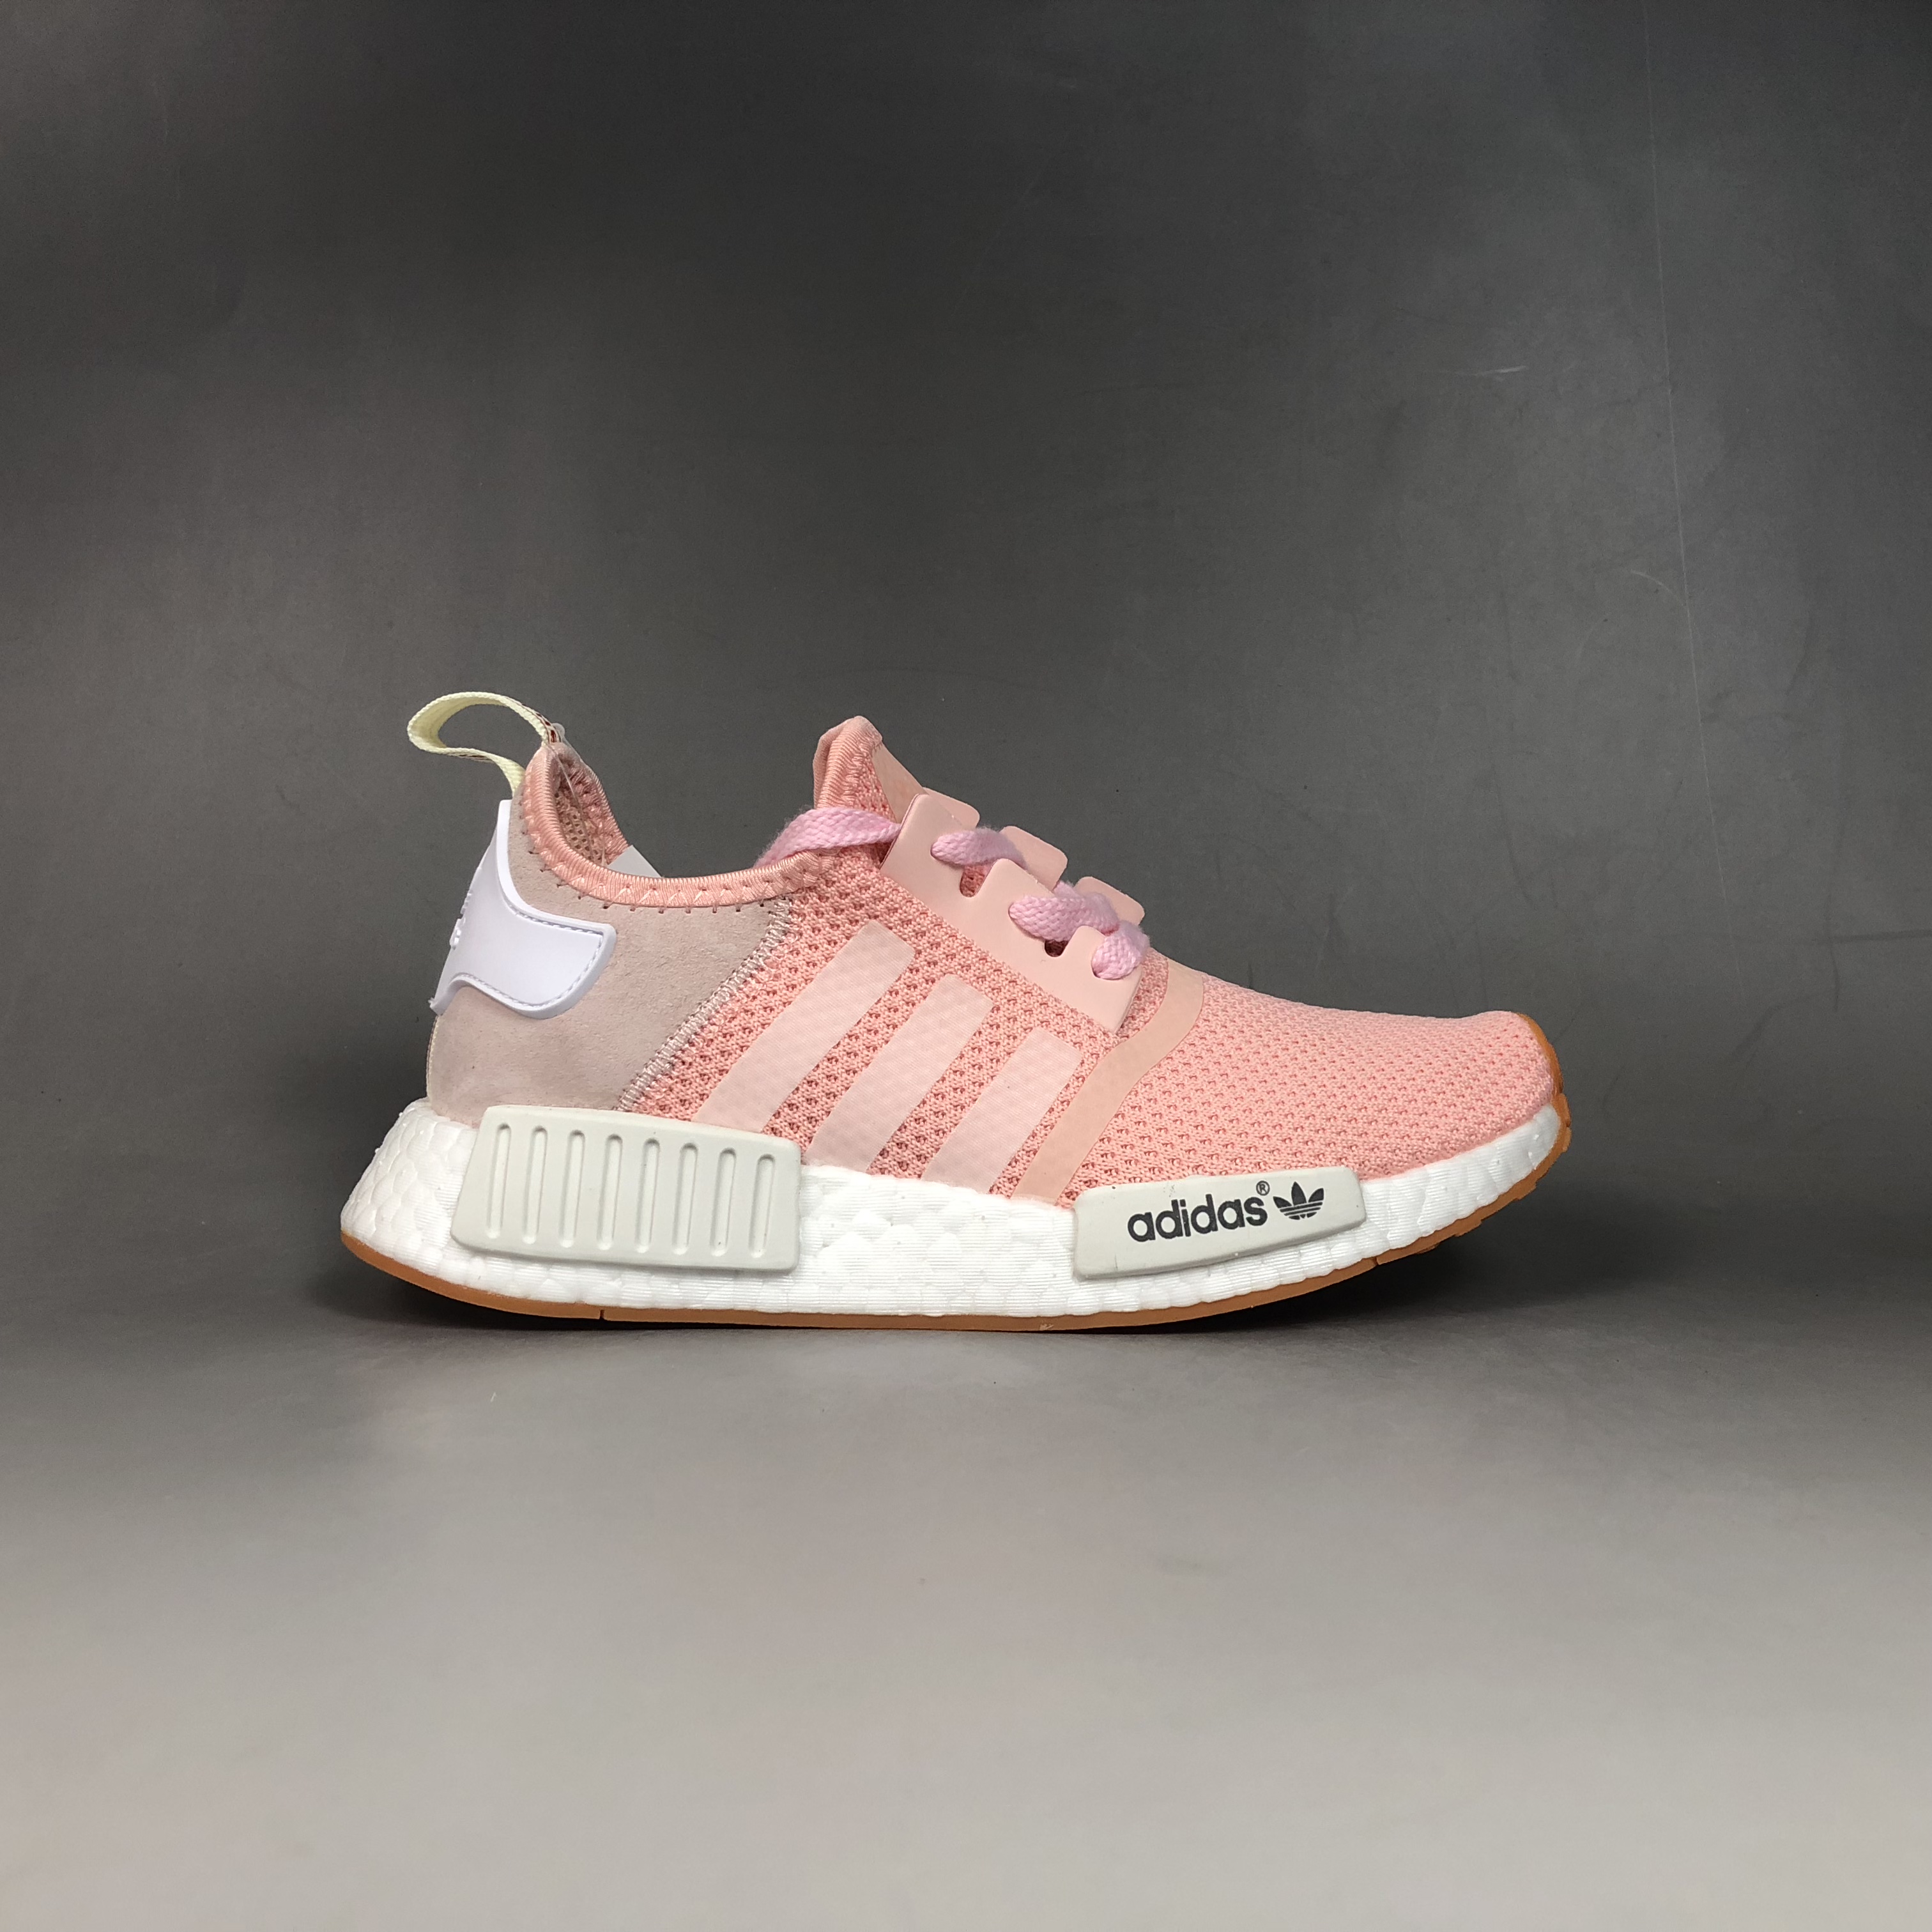 adidas NMD R1 W Pink/White/Gum For Sale 